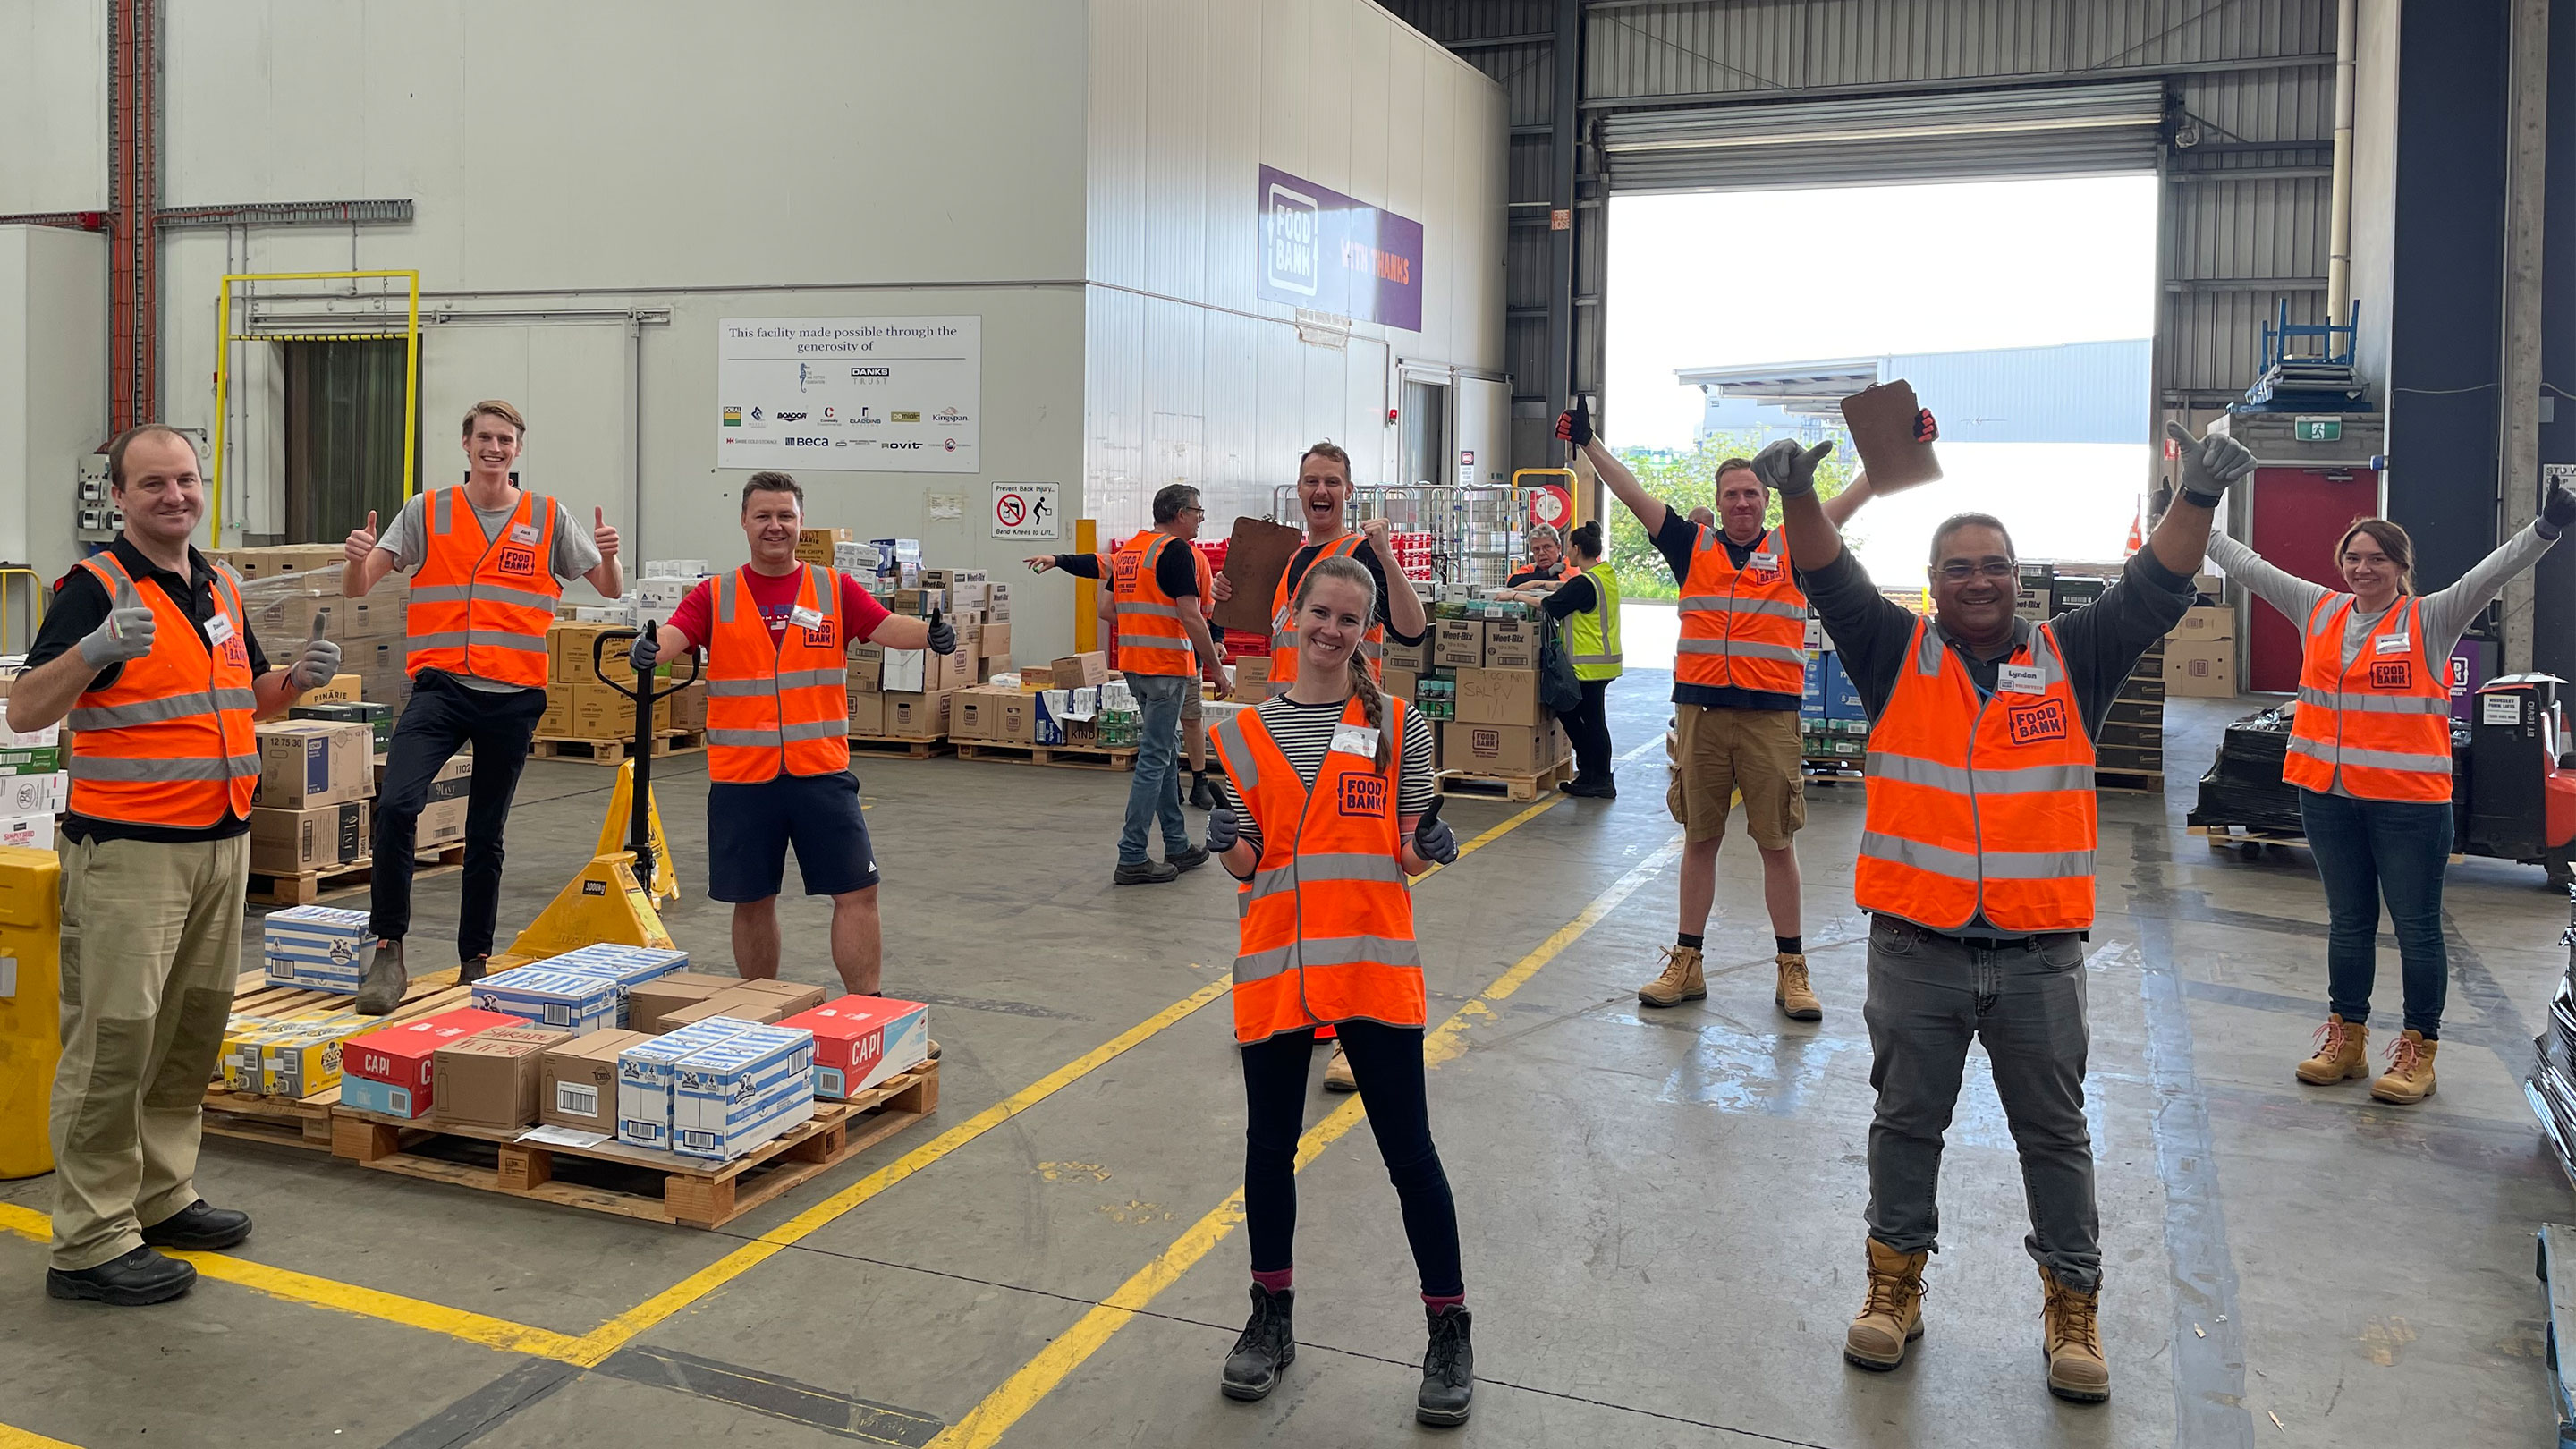 Image A team from Altona refinery recently spent the day volunteering at Foodbank Victoria’s Yarraville warehouse, packing 15,944 meals that will be sent to just some of the 533 charities that Foodbank Victoria supports.